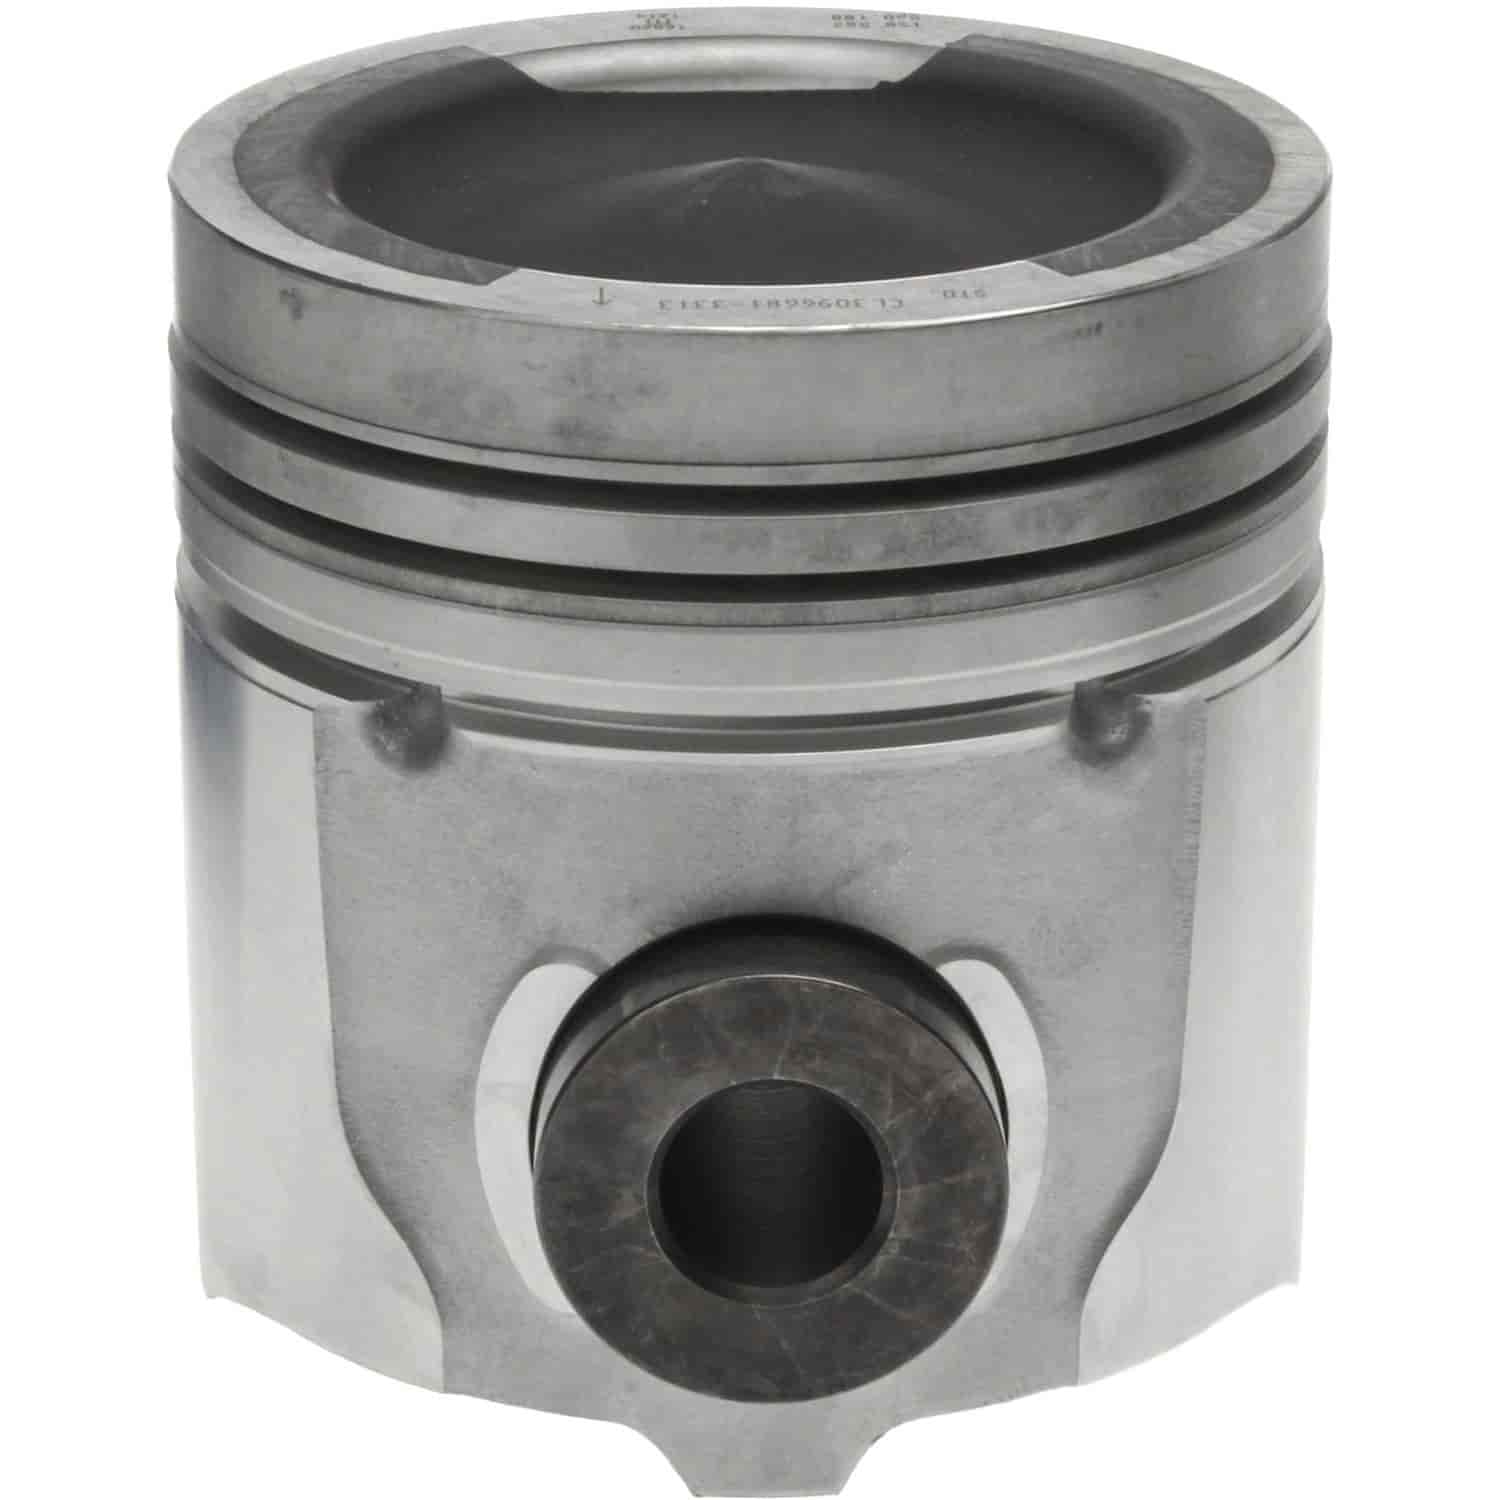 Piston for Cummins 6.250 Bore 6-12 cylinders K19-K38 Series Engines 15.5 1CR